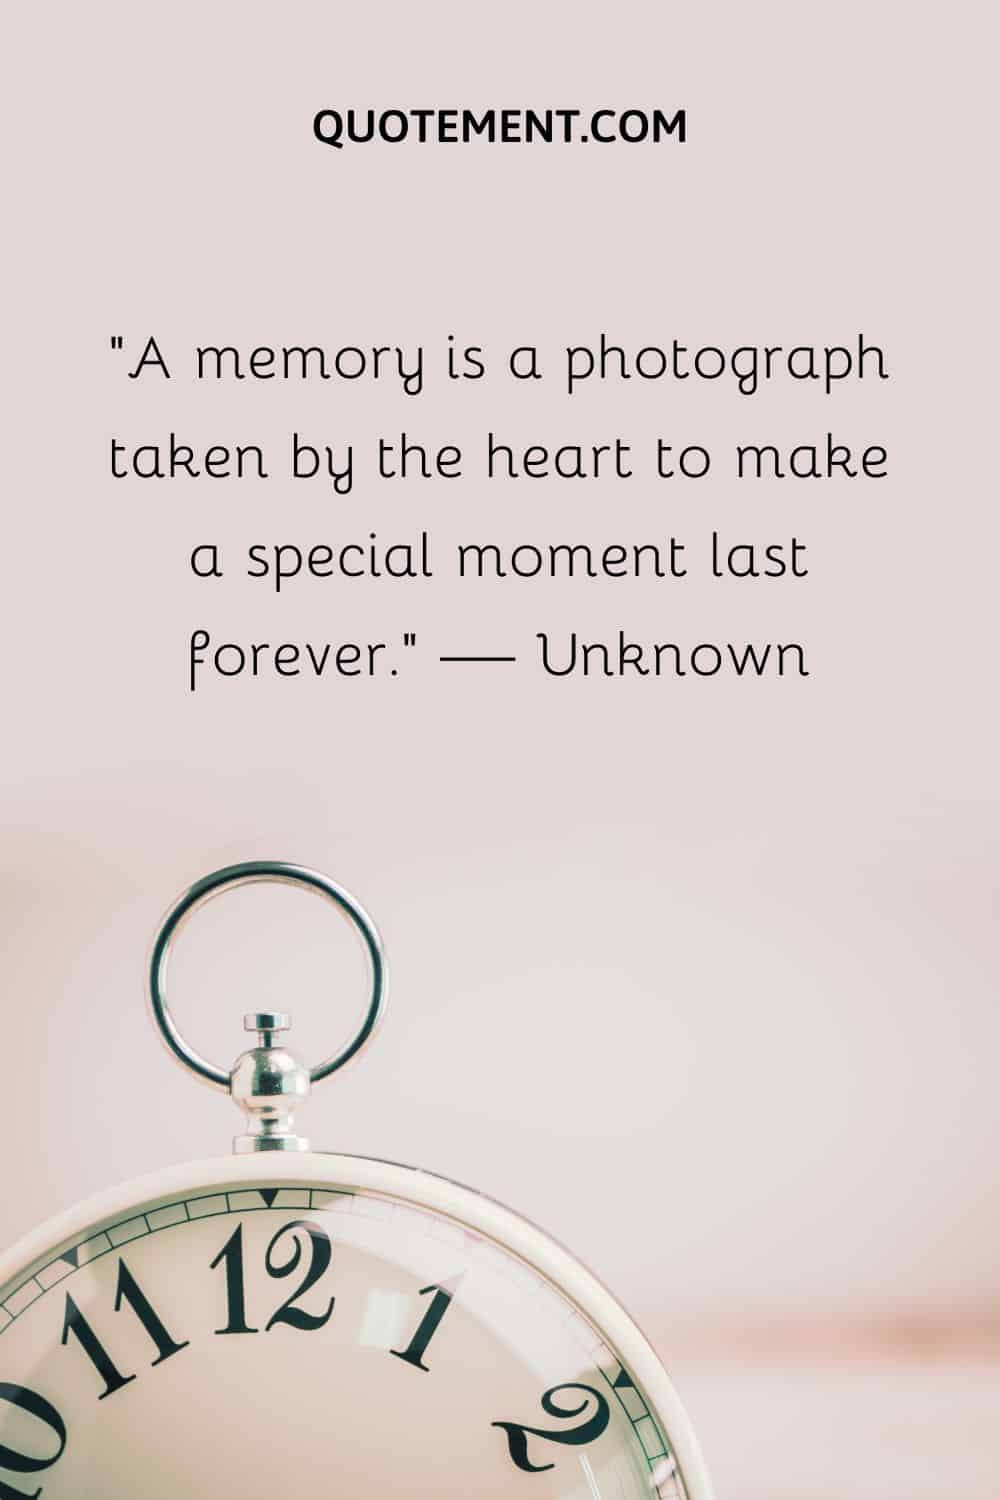 A memory is a photograph taken by the heart to make a special moment last forever